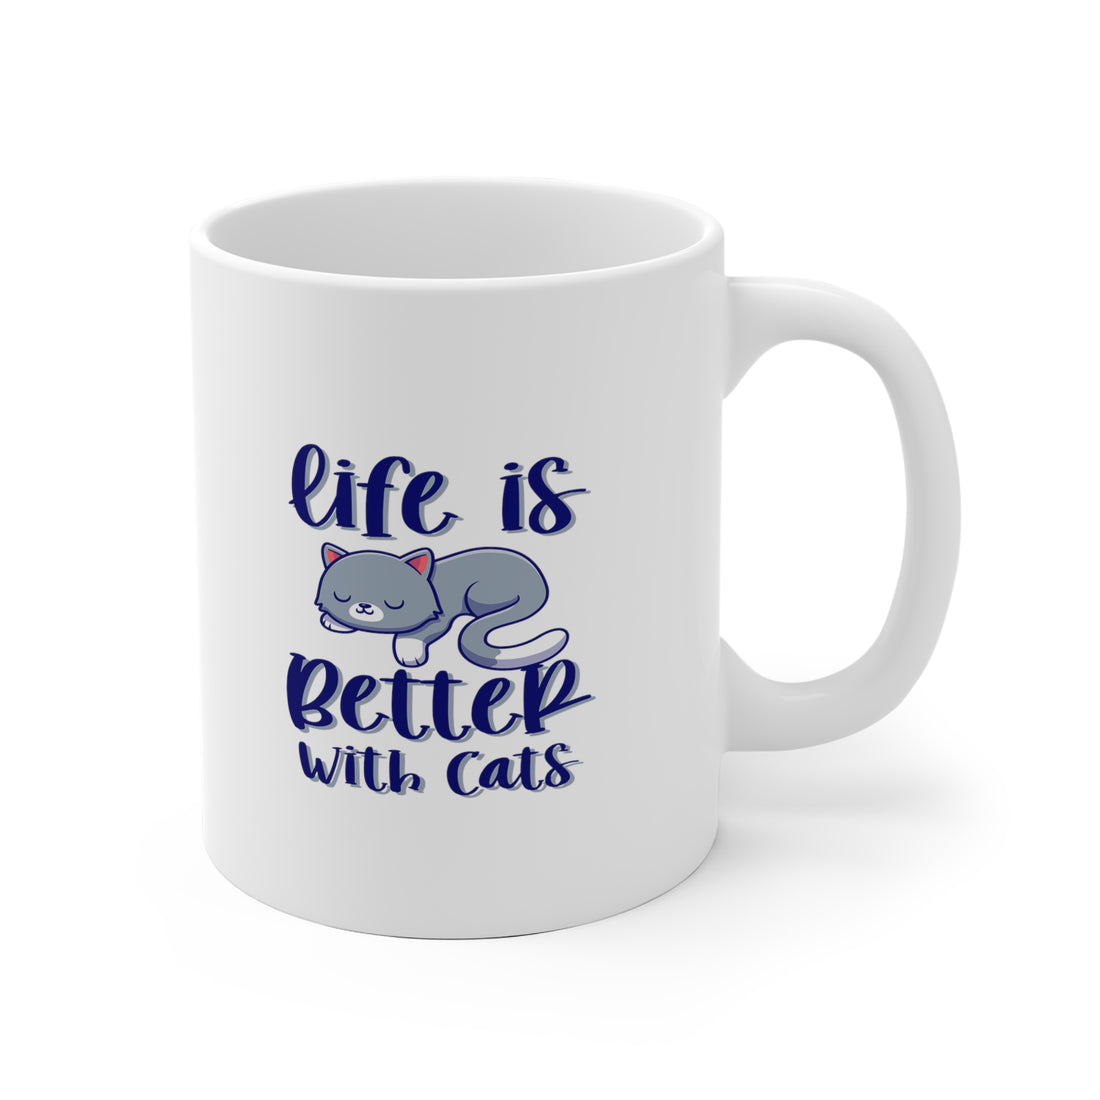 Life Is Better With Cats - White Ceramic Mug 2 sizes Available